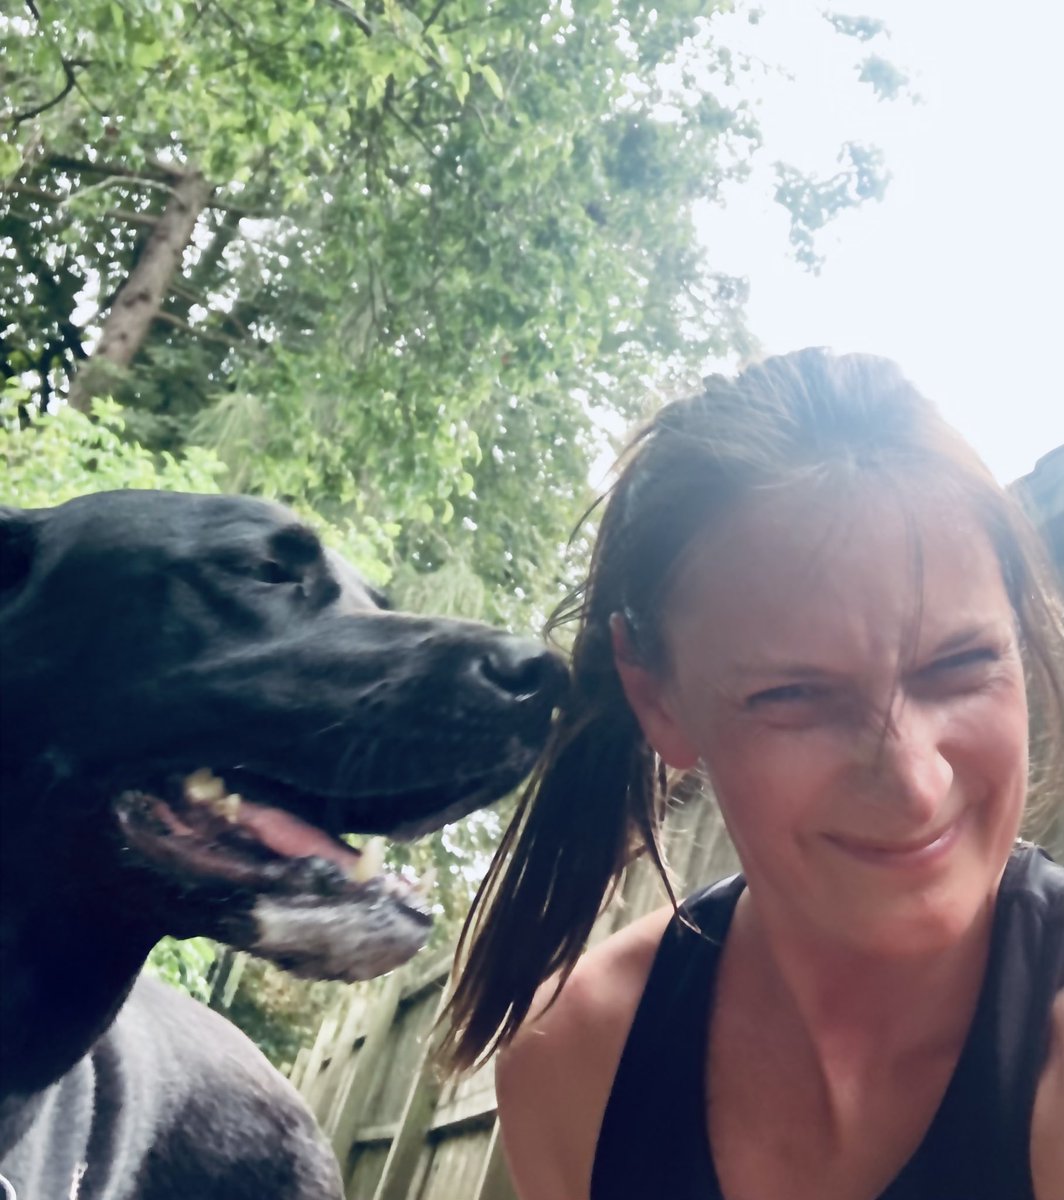 Dog is my metronome 🐾 if I time my steps to be roughly the same as Barney’s, I end up with a cadence of about 170. Much better than annoying beeping or music that drowns out the birdsong 🙌 🦍 #ukrunchat